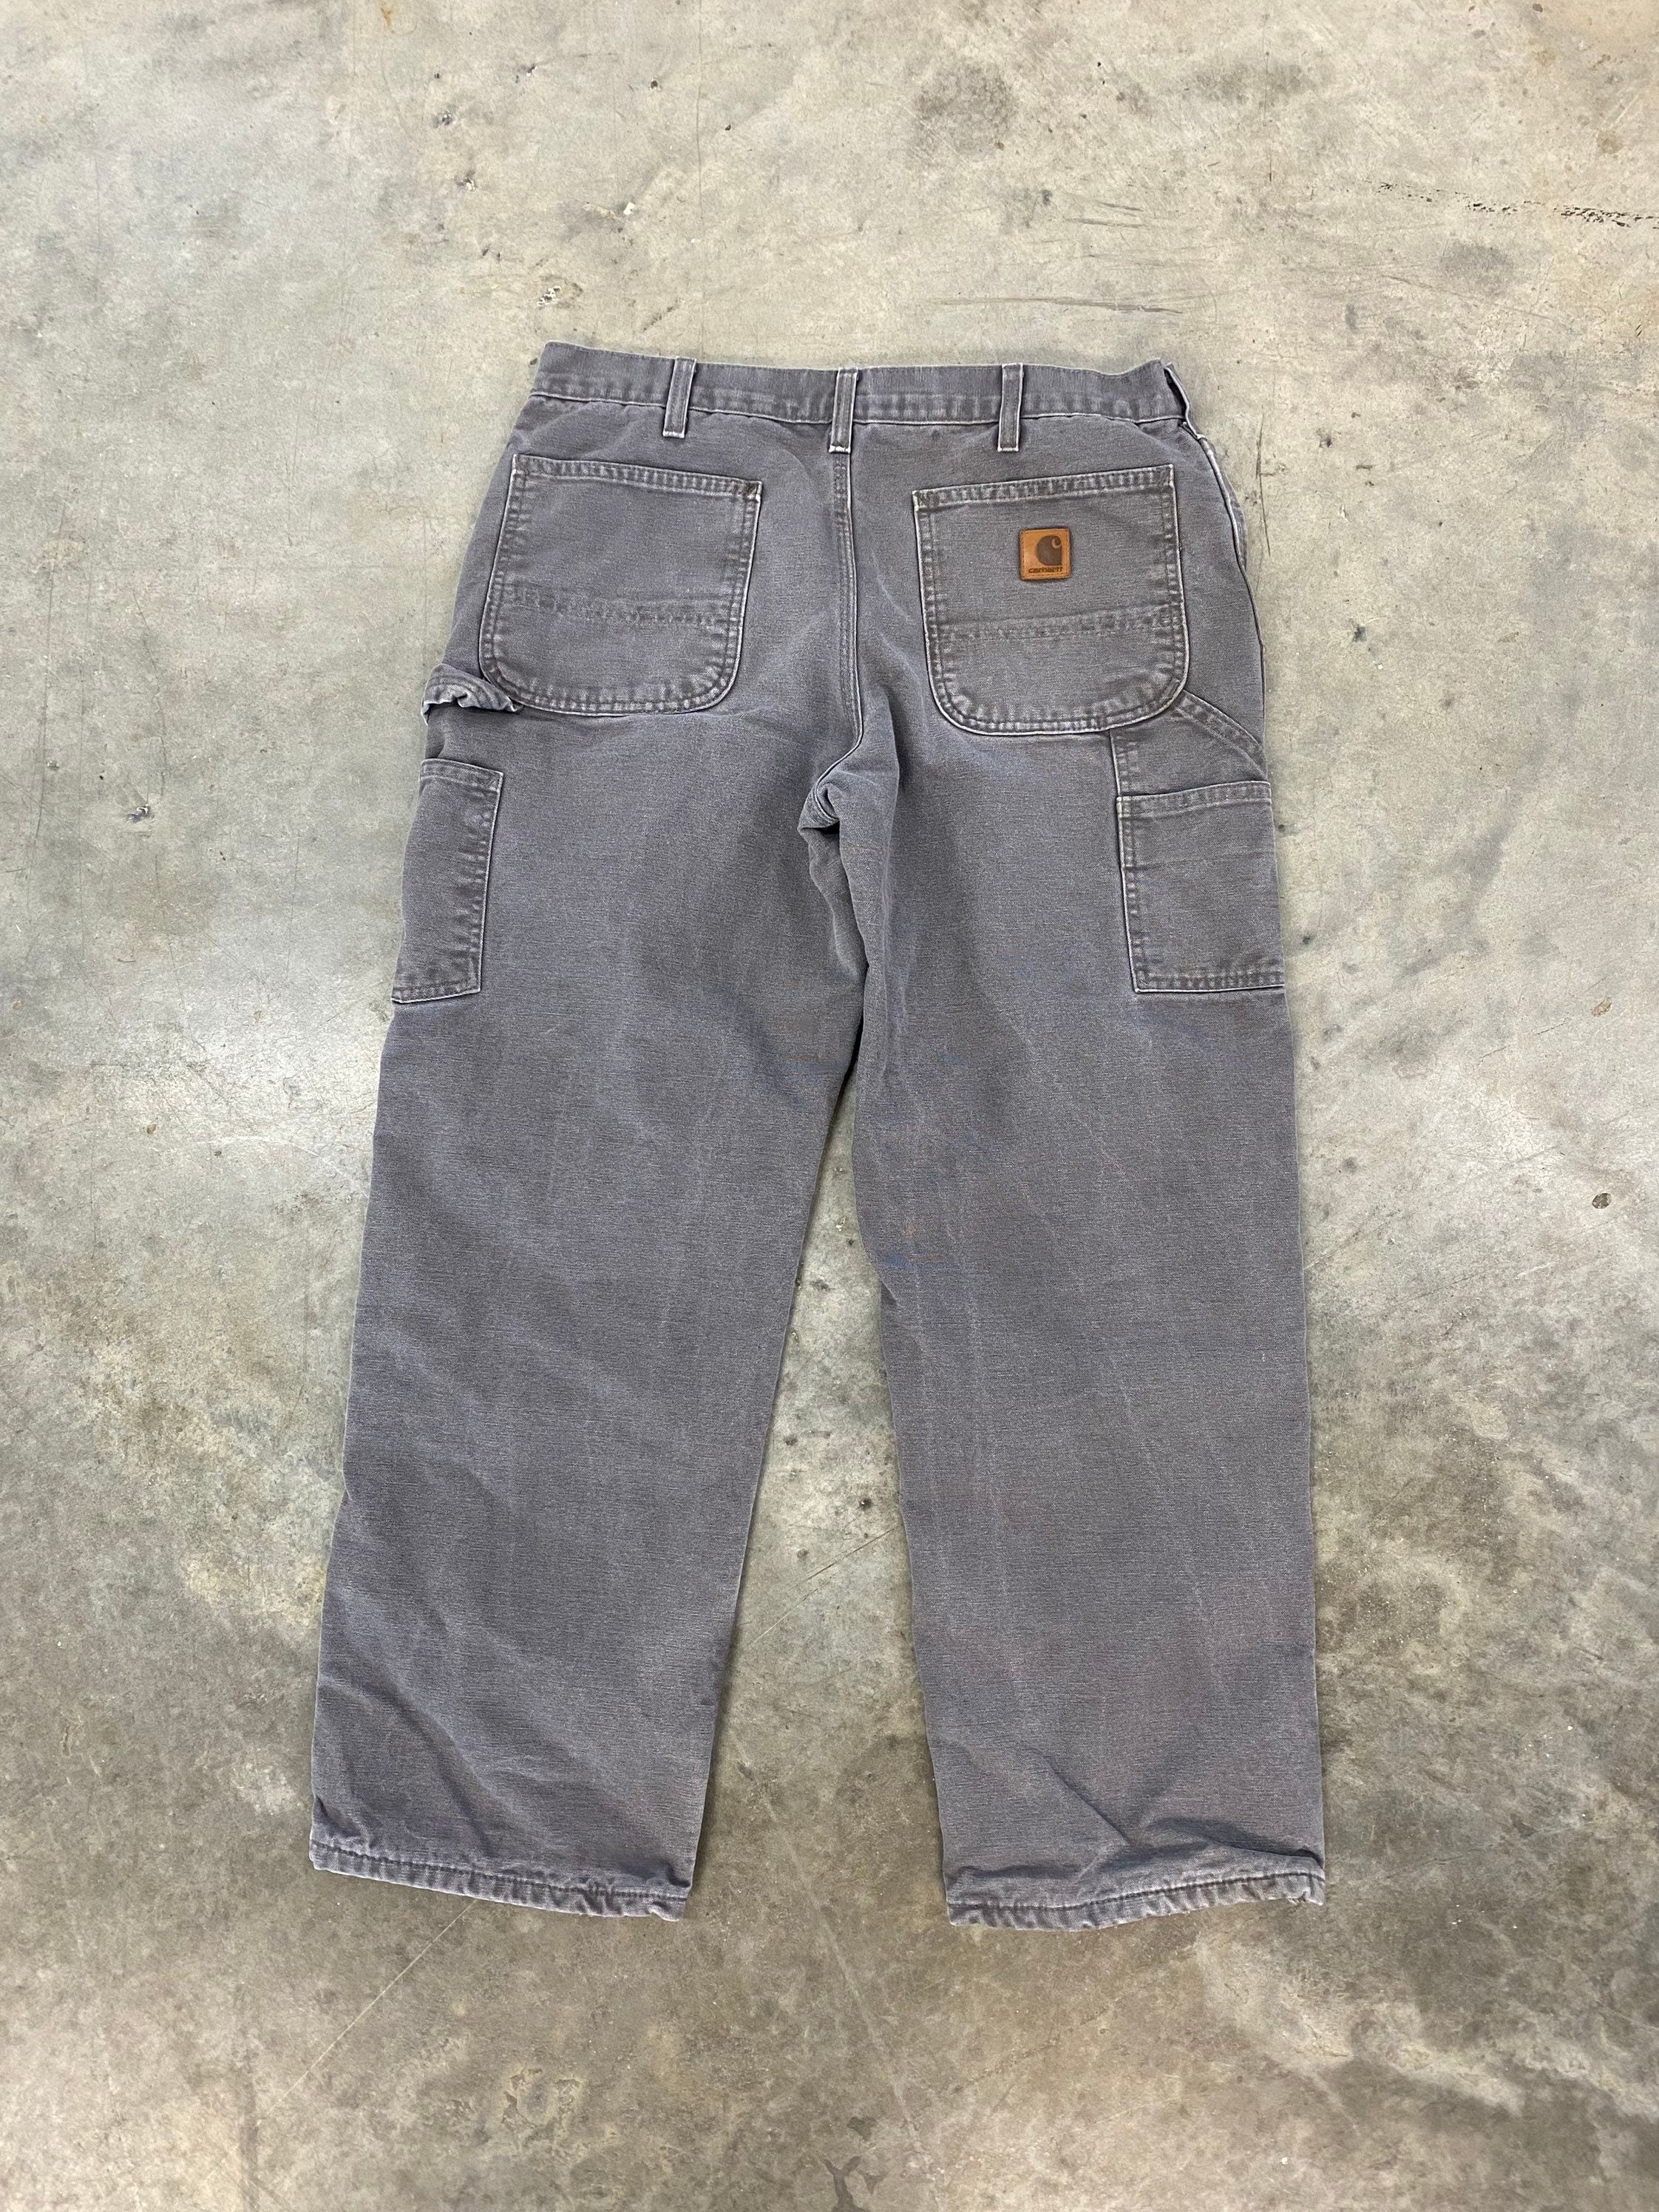 Classic Carhartt Workwear Carpenter Style Pants As-is